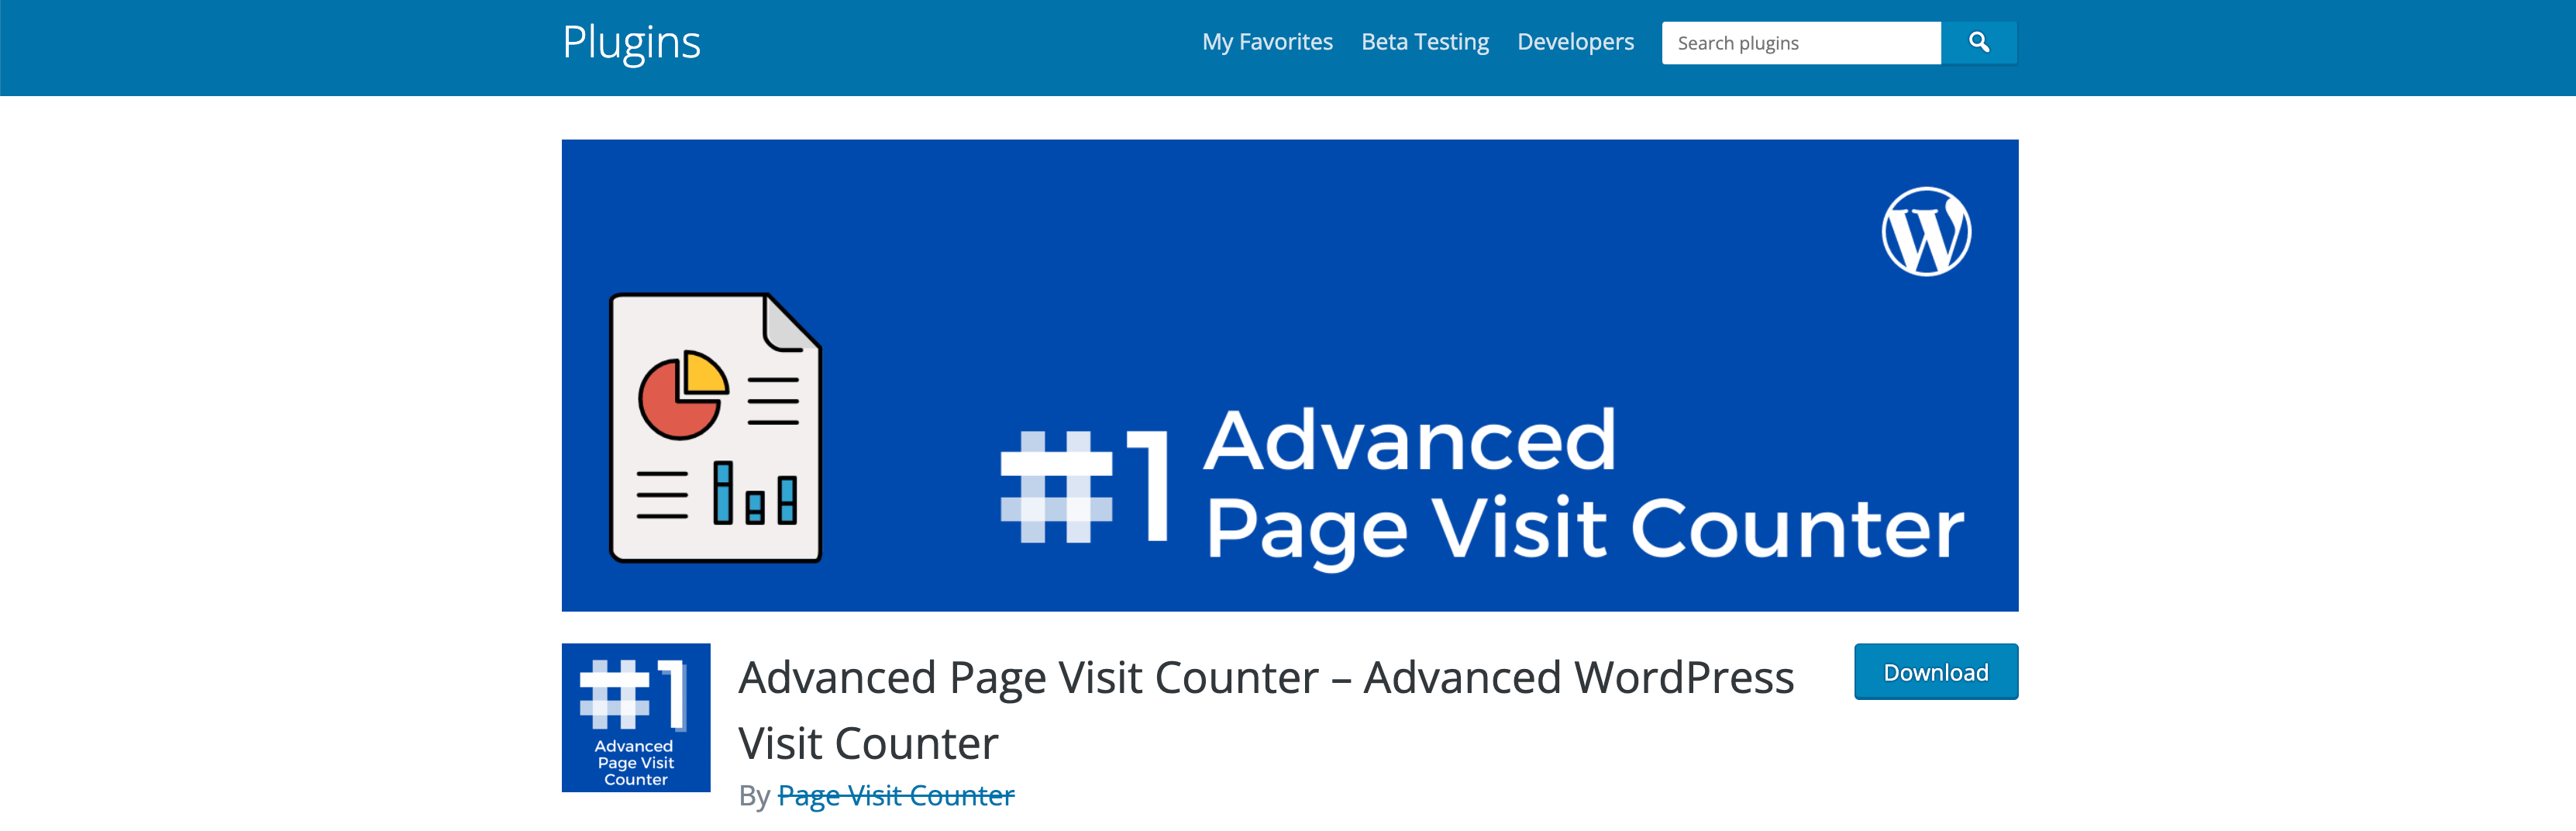 Advanced Page Visit Counter Home Page